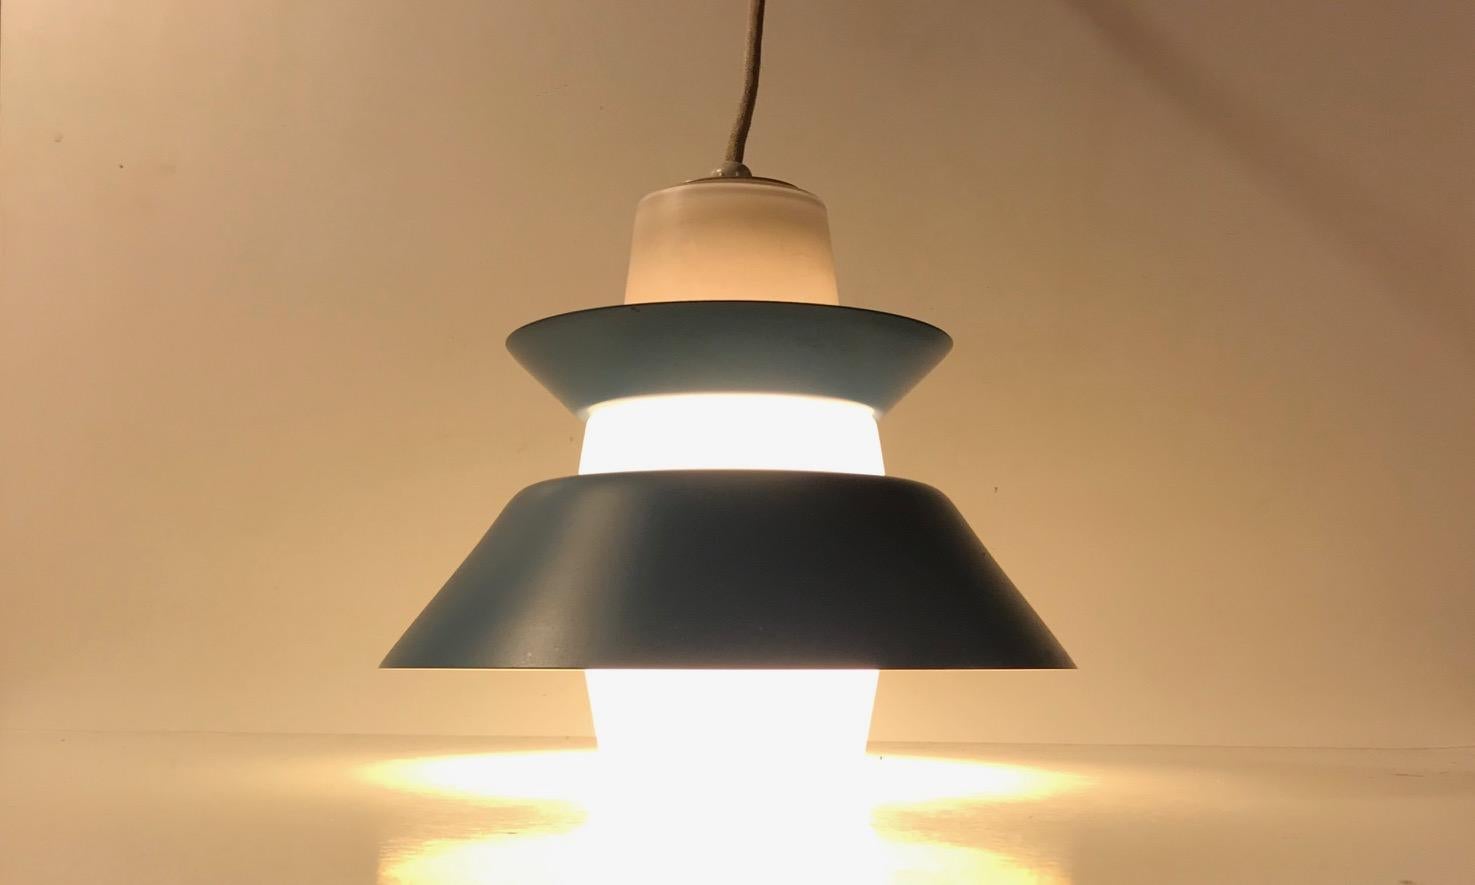 Ceiling light from Voss Belysning in Denmark. Manufactured during the 1950s in a style reminiscent of Stilnovo and Svend Aage Holm-Sørensen. It is composed of a cased opaline glass shade and has two over-laying petrol blue steel shades/diffusers.